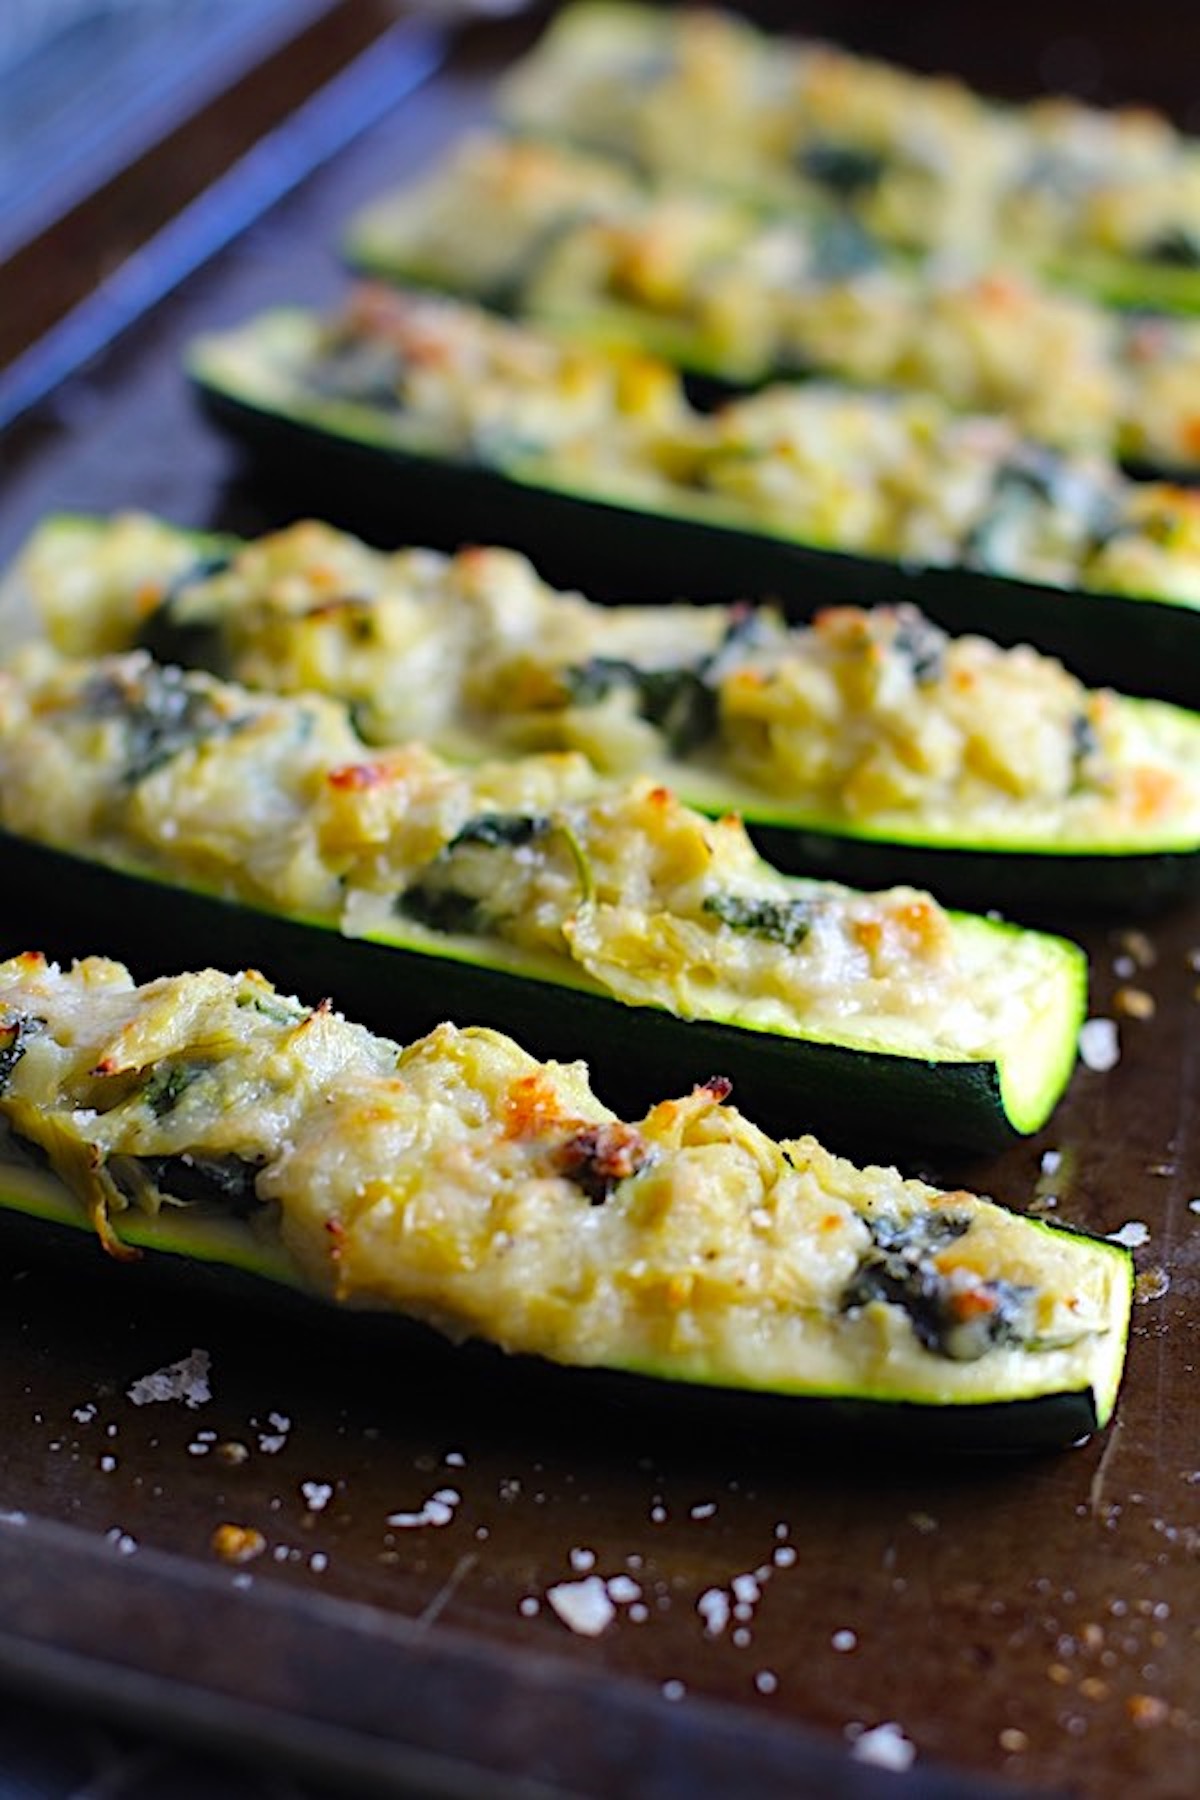 Close up of Artichoke Spinach Stuffed Zucchini Recipe on a pan. Each fantastic bite gives you creamy artichoke, nutty cheesy Parmesan, spinach, and zucchini. Prepare entirely ahead, then bake 20 minutes and enjoy!